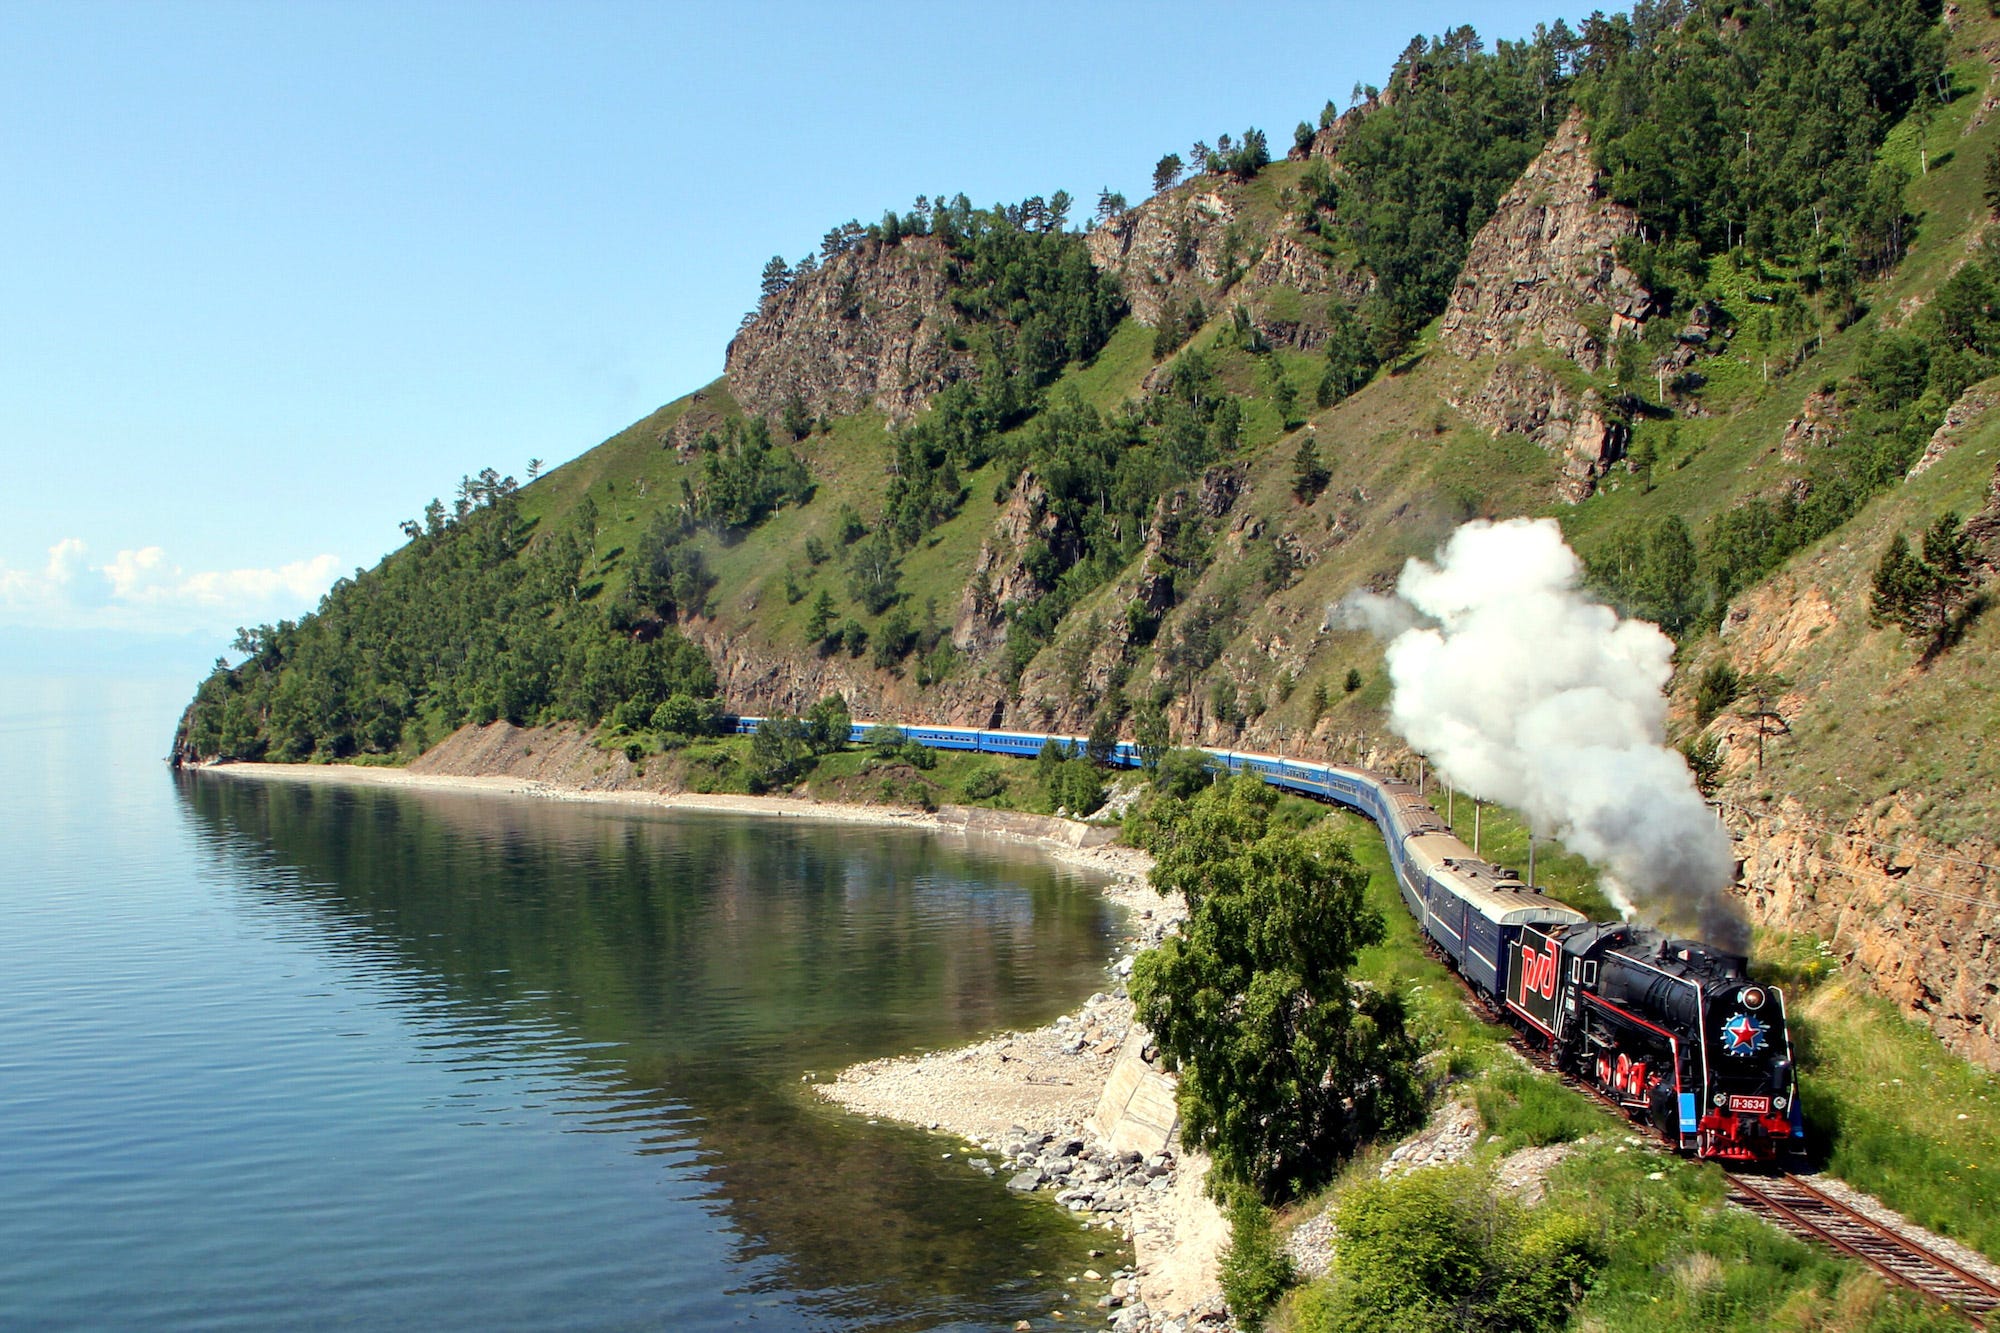 <p><strong>Country</strong>: Russia</p><p><strong>Duration of trip</strong>: 14 days</p><p><strong>Description: </strong>The Trans-Siberian Railway is the longest railway line in the world. There are several trains to choose from, like the Golden Eagle Trans-Siberian Express, which offers 14-day excursions through Russia. Traveling between Vladivostok and Moscow, the luxury train passes by endless grasslands and Lake Baikal, the deepest lake on Earth.</p><p><strong>Cost: </strong>Varied </p><p><em>Source: <a href="http://www.goldeneagleluxurytrains.com/journeys/trans-siberian-express/eastbound/" rel="nofollow noopener">Golden Eagle Luxury Trains</a></em></p>